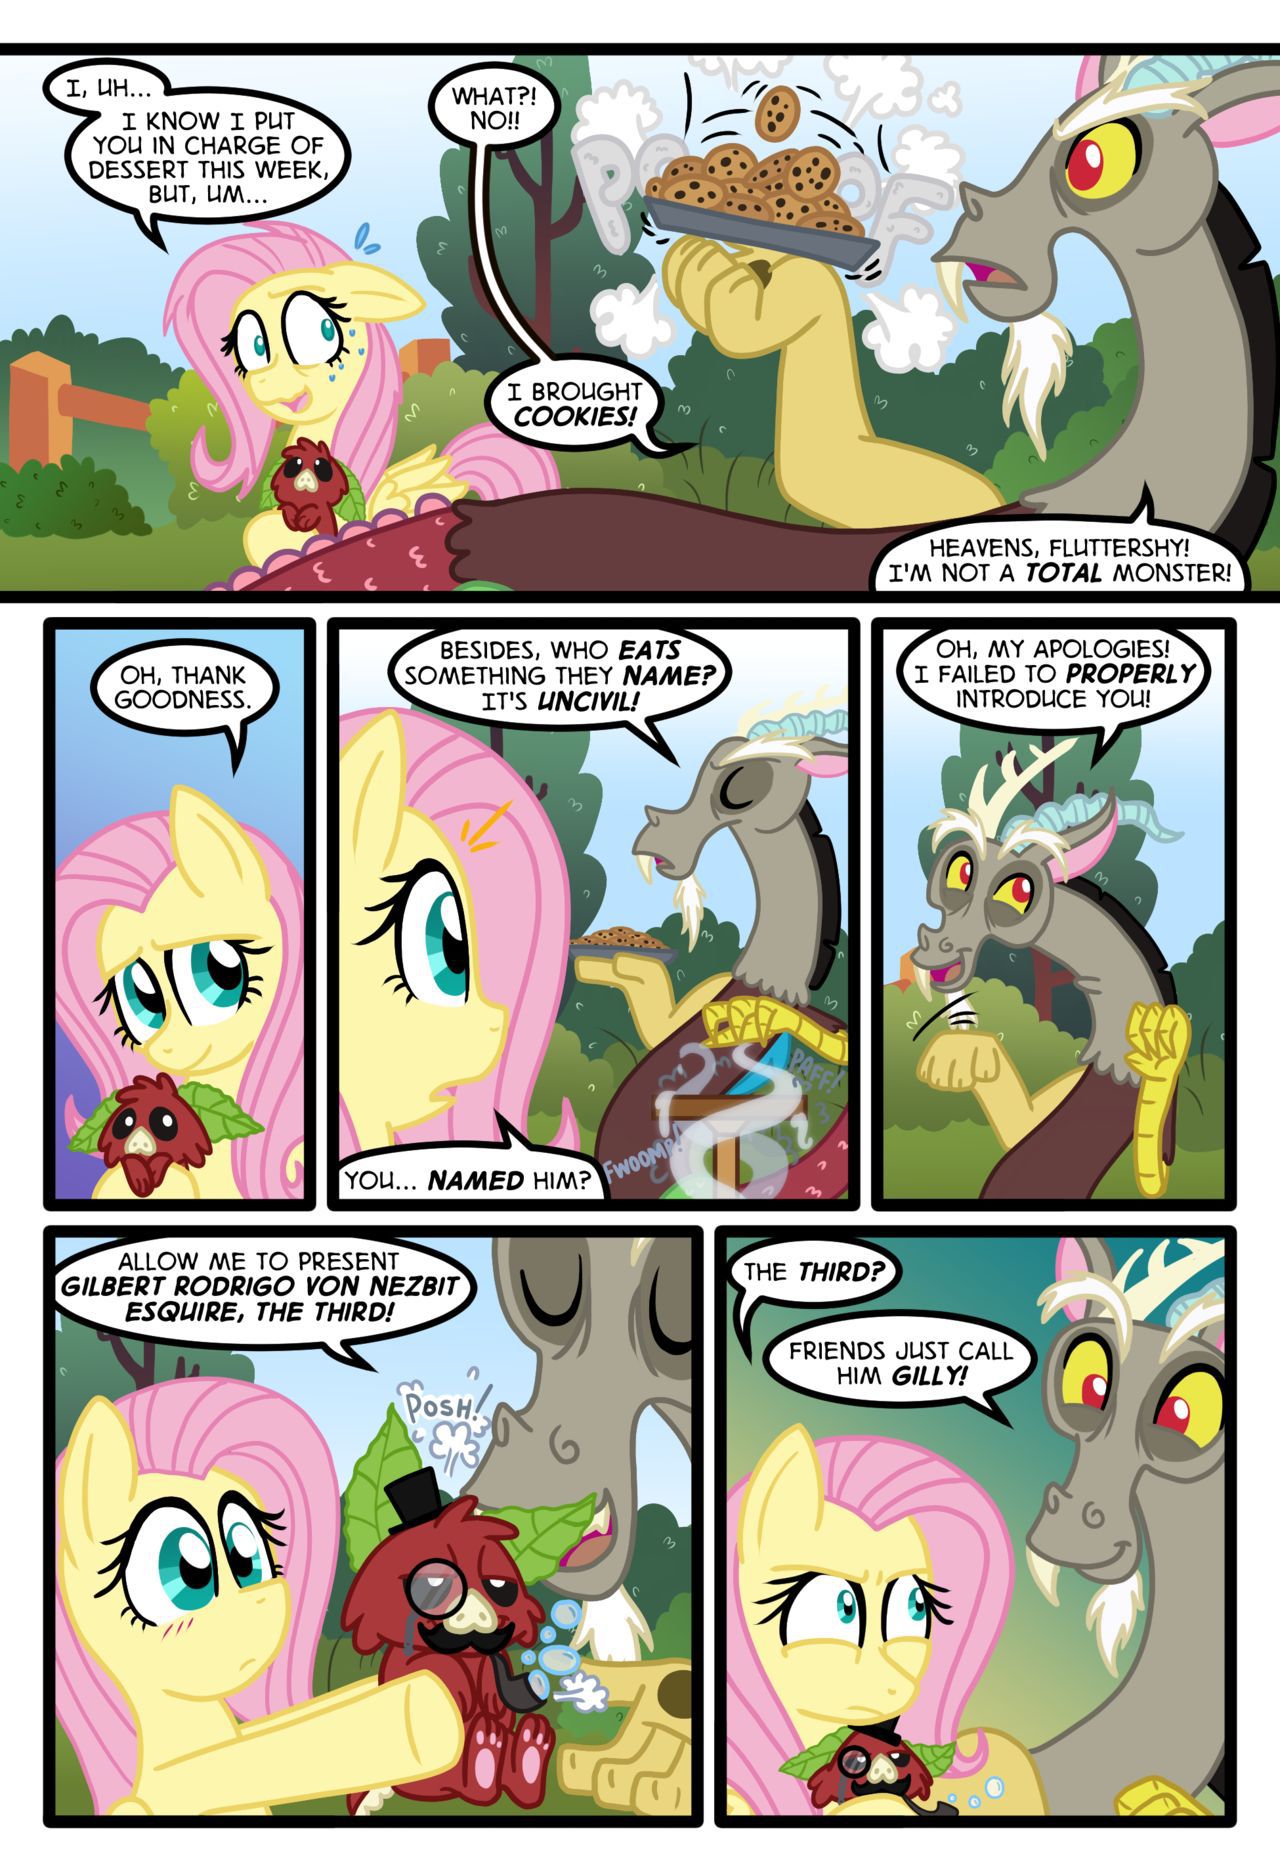 [Zaron] Lonely Hooves (My Little Pony Friendship Is Magic) [Ongoing] 38